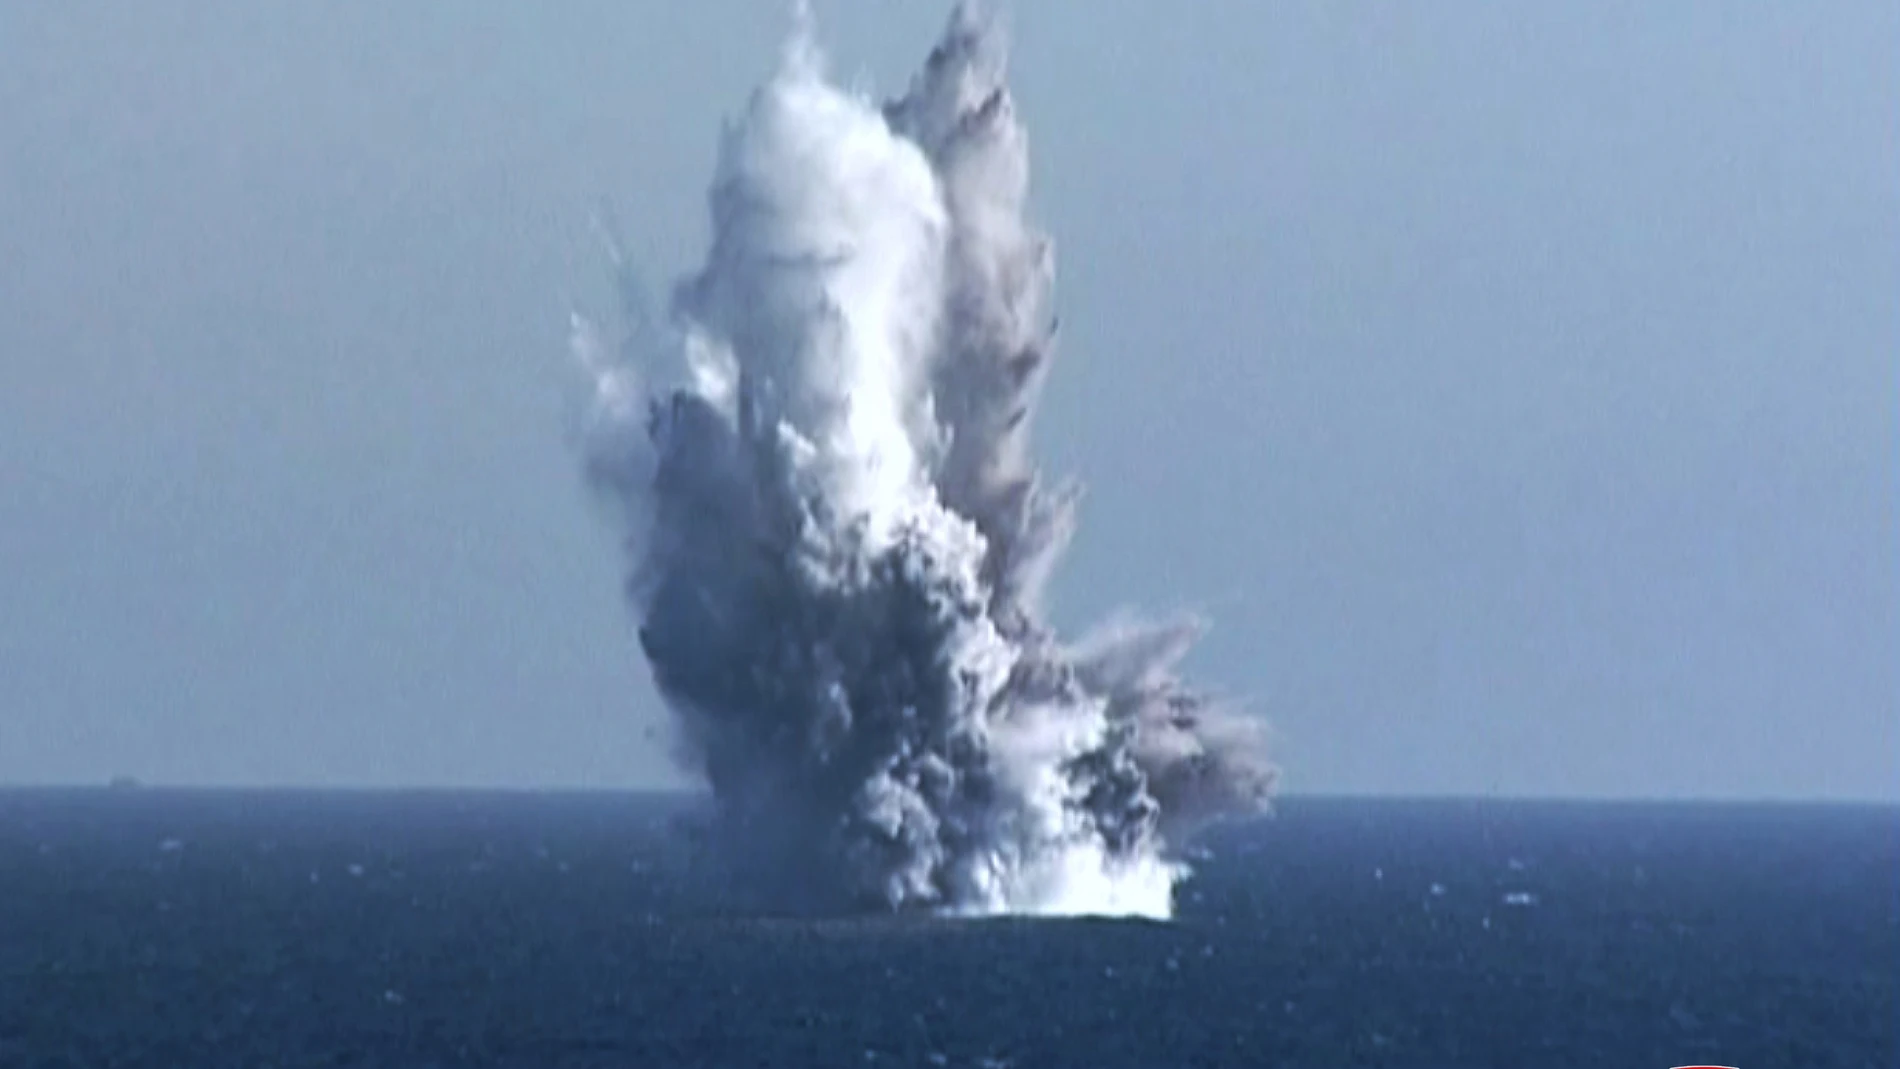 Riwon County (Korea, Democratic People''s Republic Of), 21/03/2023.- A photo released by the official North Korean Central News Agency (KCNA) shows the test of North Korea's underwater nuclear attack drone, in the waters off the coast of Riwon County, North Korea, 21 March 2023 (issued 24 March 2023). According to North Korean state media, the drone carried a warhead capable of 'spawning a radioactive tsunami' and 'stealthily attacking enemies.' The test was held amid joint US-South Korea military exercises. (Atentado, Corea del Sur) EFE/EPA/KCNA EDITORIAL USE ONLY
